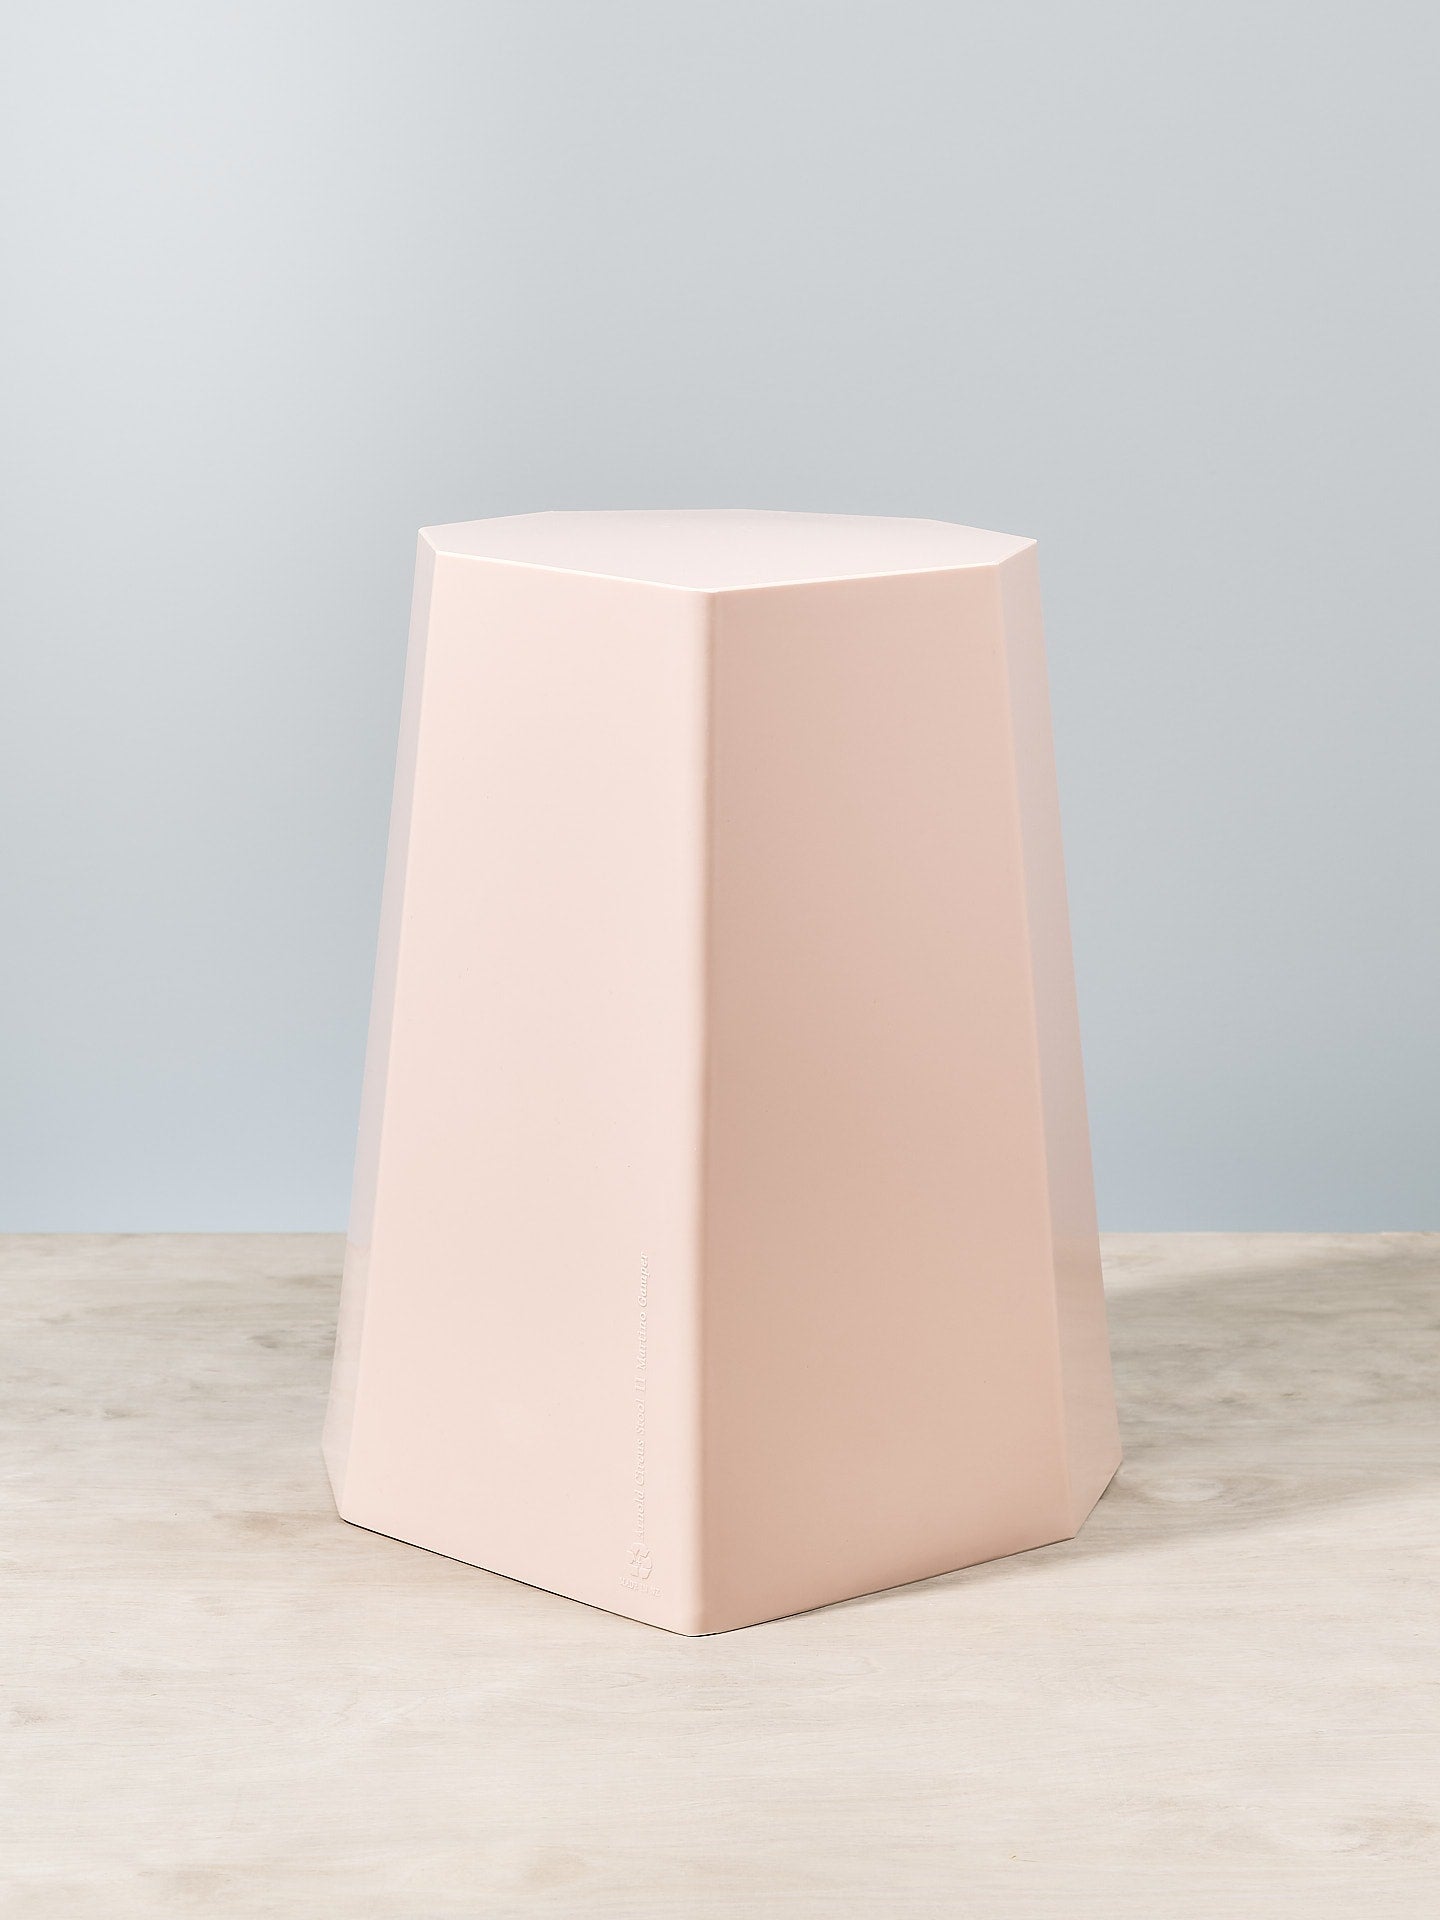 An Arnold Circus Stool - Pink by Martino Gamper on top of a wooden table.